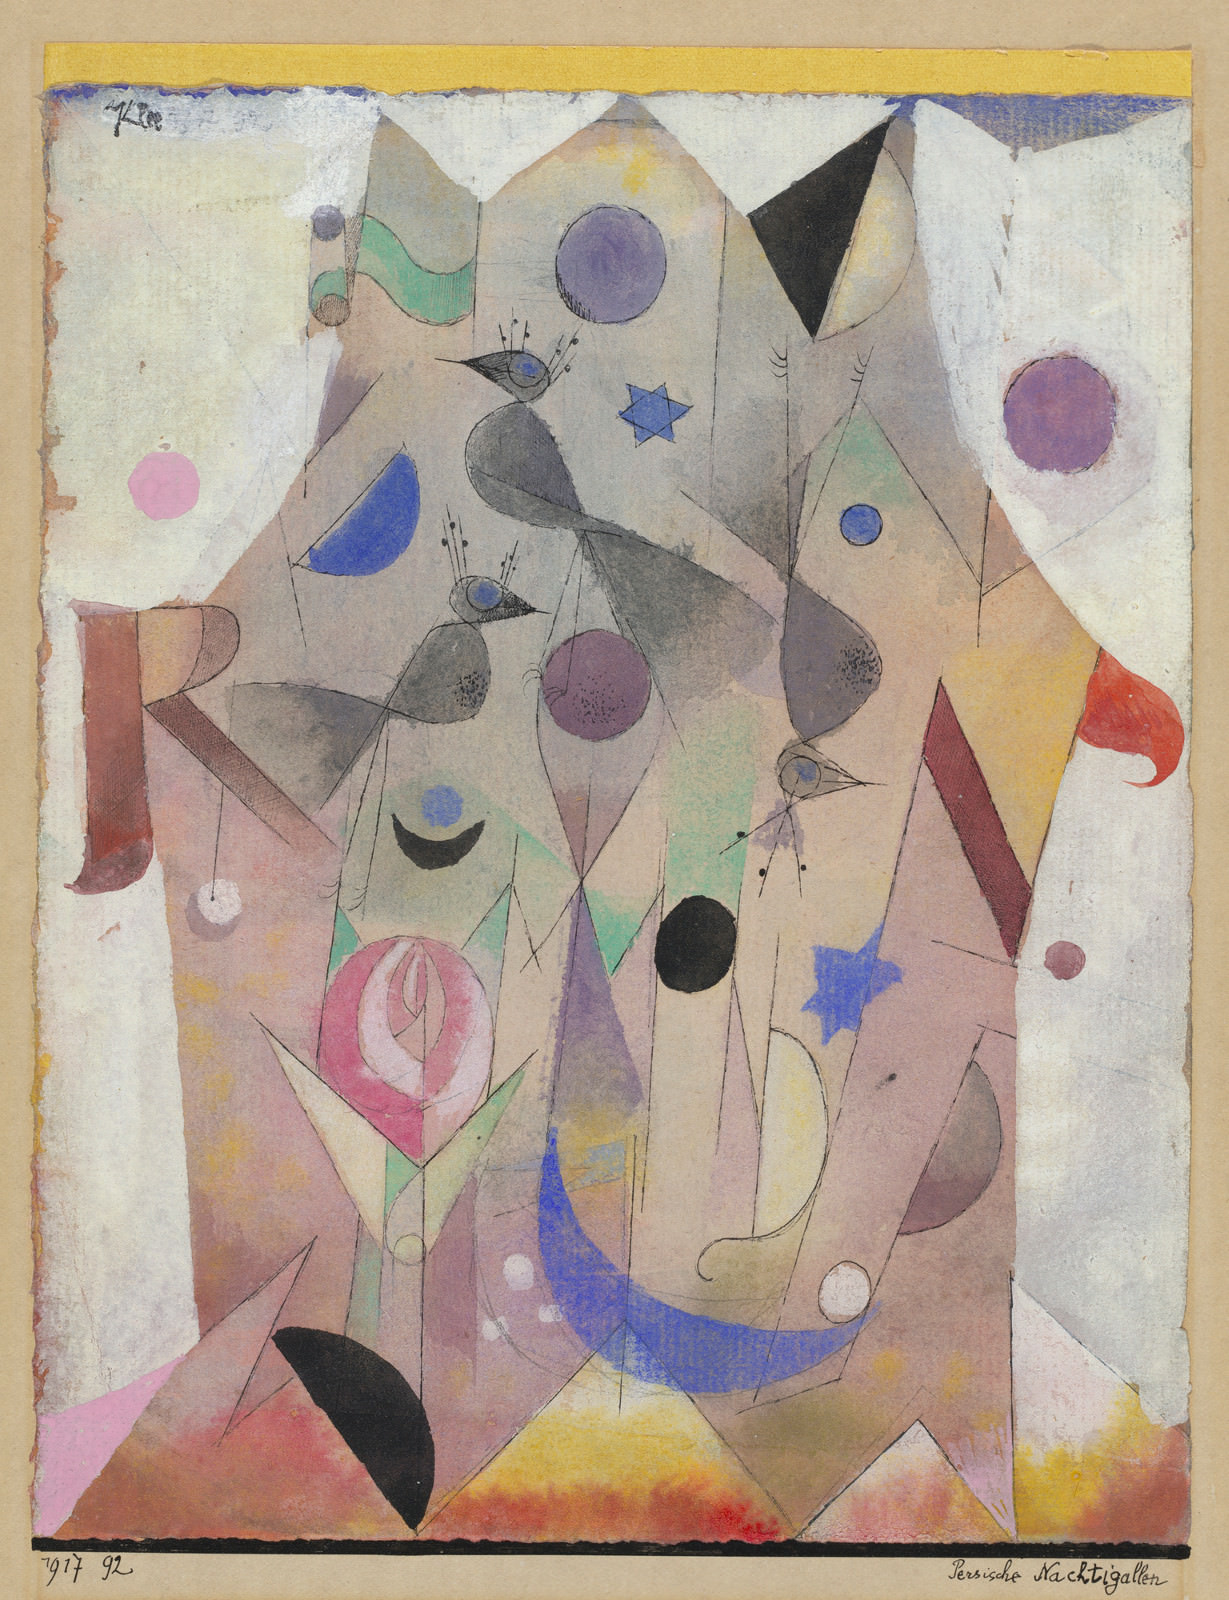 Fig. 9 – Paul Klee, Persian Nightingales, 1917, Gouache, watercolor, and pen and black ink over graphite on laid paper, mounted on cardboard; the sheet bordered at the top with yellow paper strip mounted to support, overall: 22.8 x 18.1 cm (9 x 7 1/8 in.). National Gallery of Art, Washington. Gift of Catherine Gamble Curran and Family, in Honor of the 50th Anniversary of the National Gallery of Art .